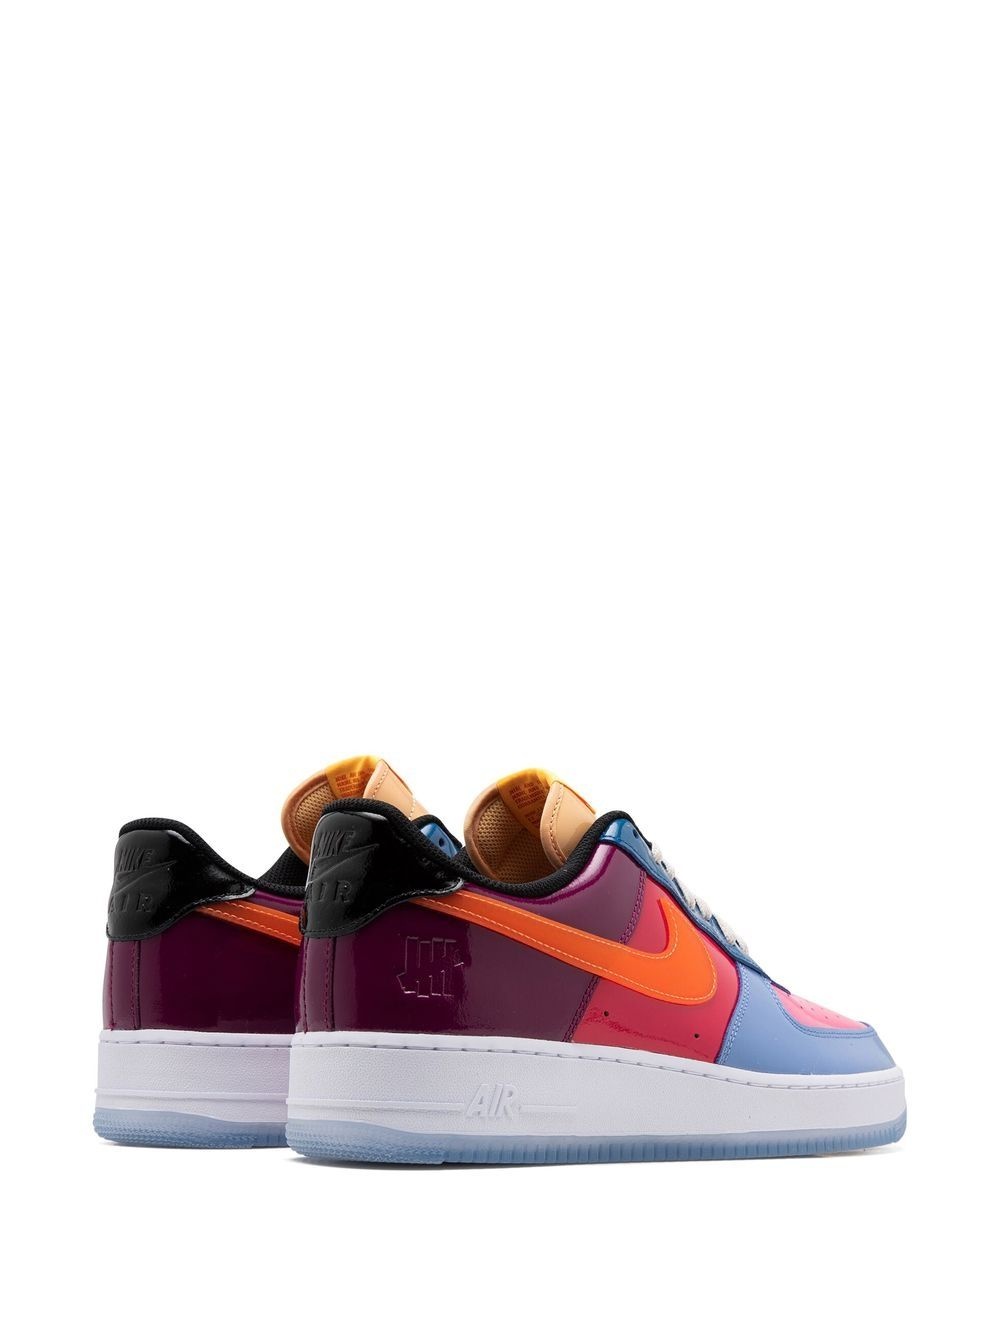 x Undefeated Air Force 1 Low "Multi Patent" sneakers - 3